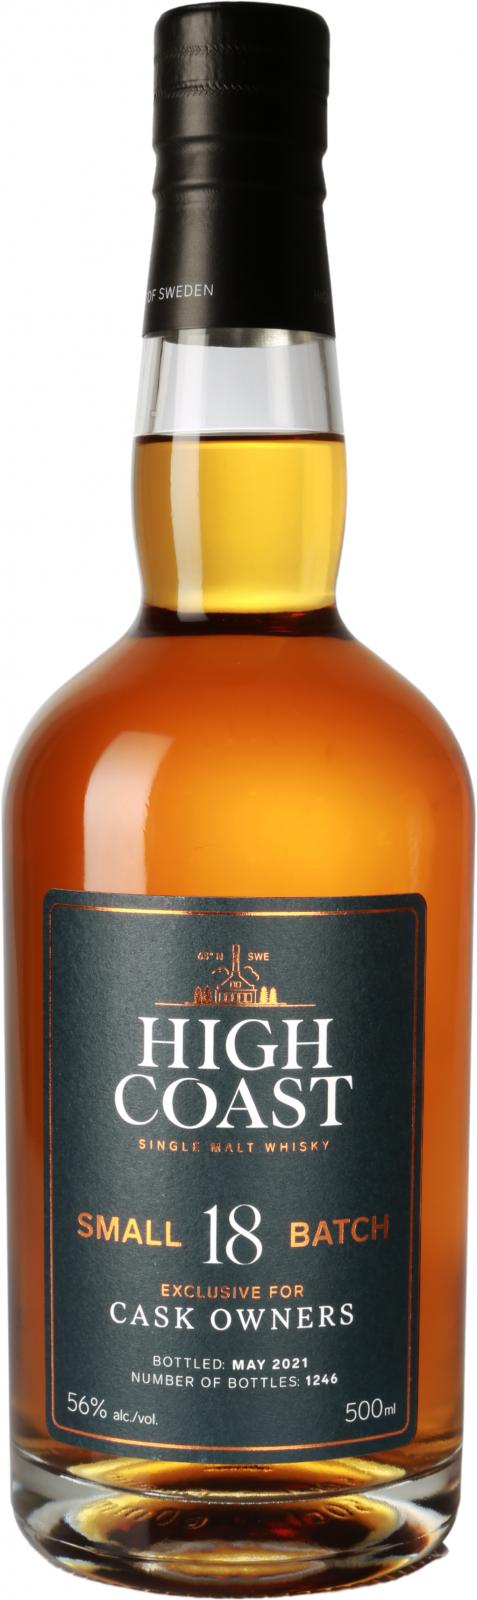 High Coast Small Batch No 18 Exclusive for cask owners #1388 Cask Owners 56% 500ml